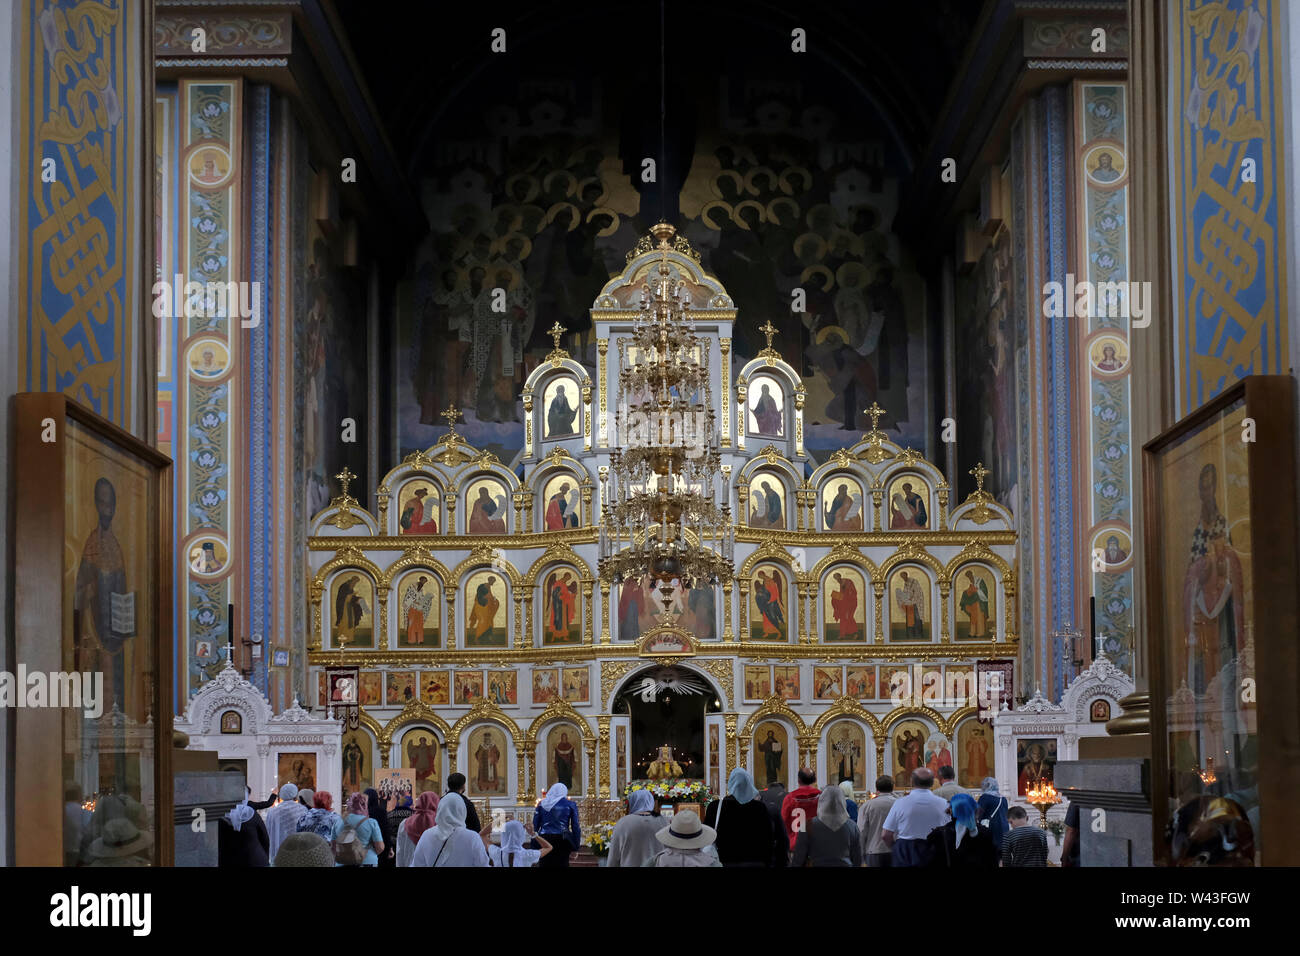 People attend a Sunday mass inside St. Nicholas Orthodox Cathedral in the city of Kislovodsk in Stavropol Krai in the North Caucasian Federal District of Russia. Stock Photo